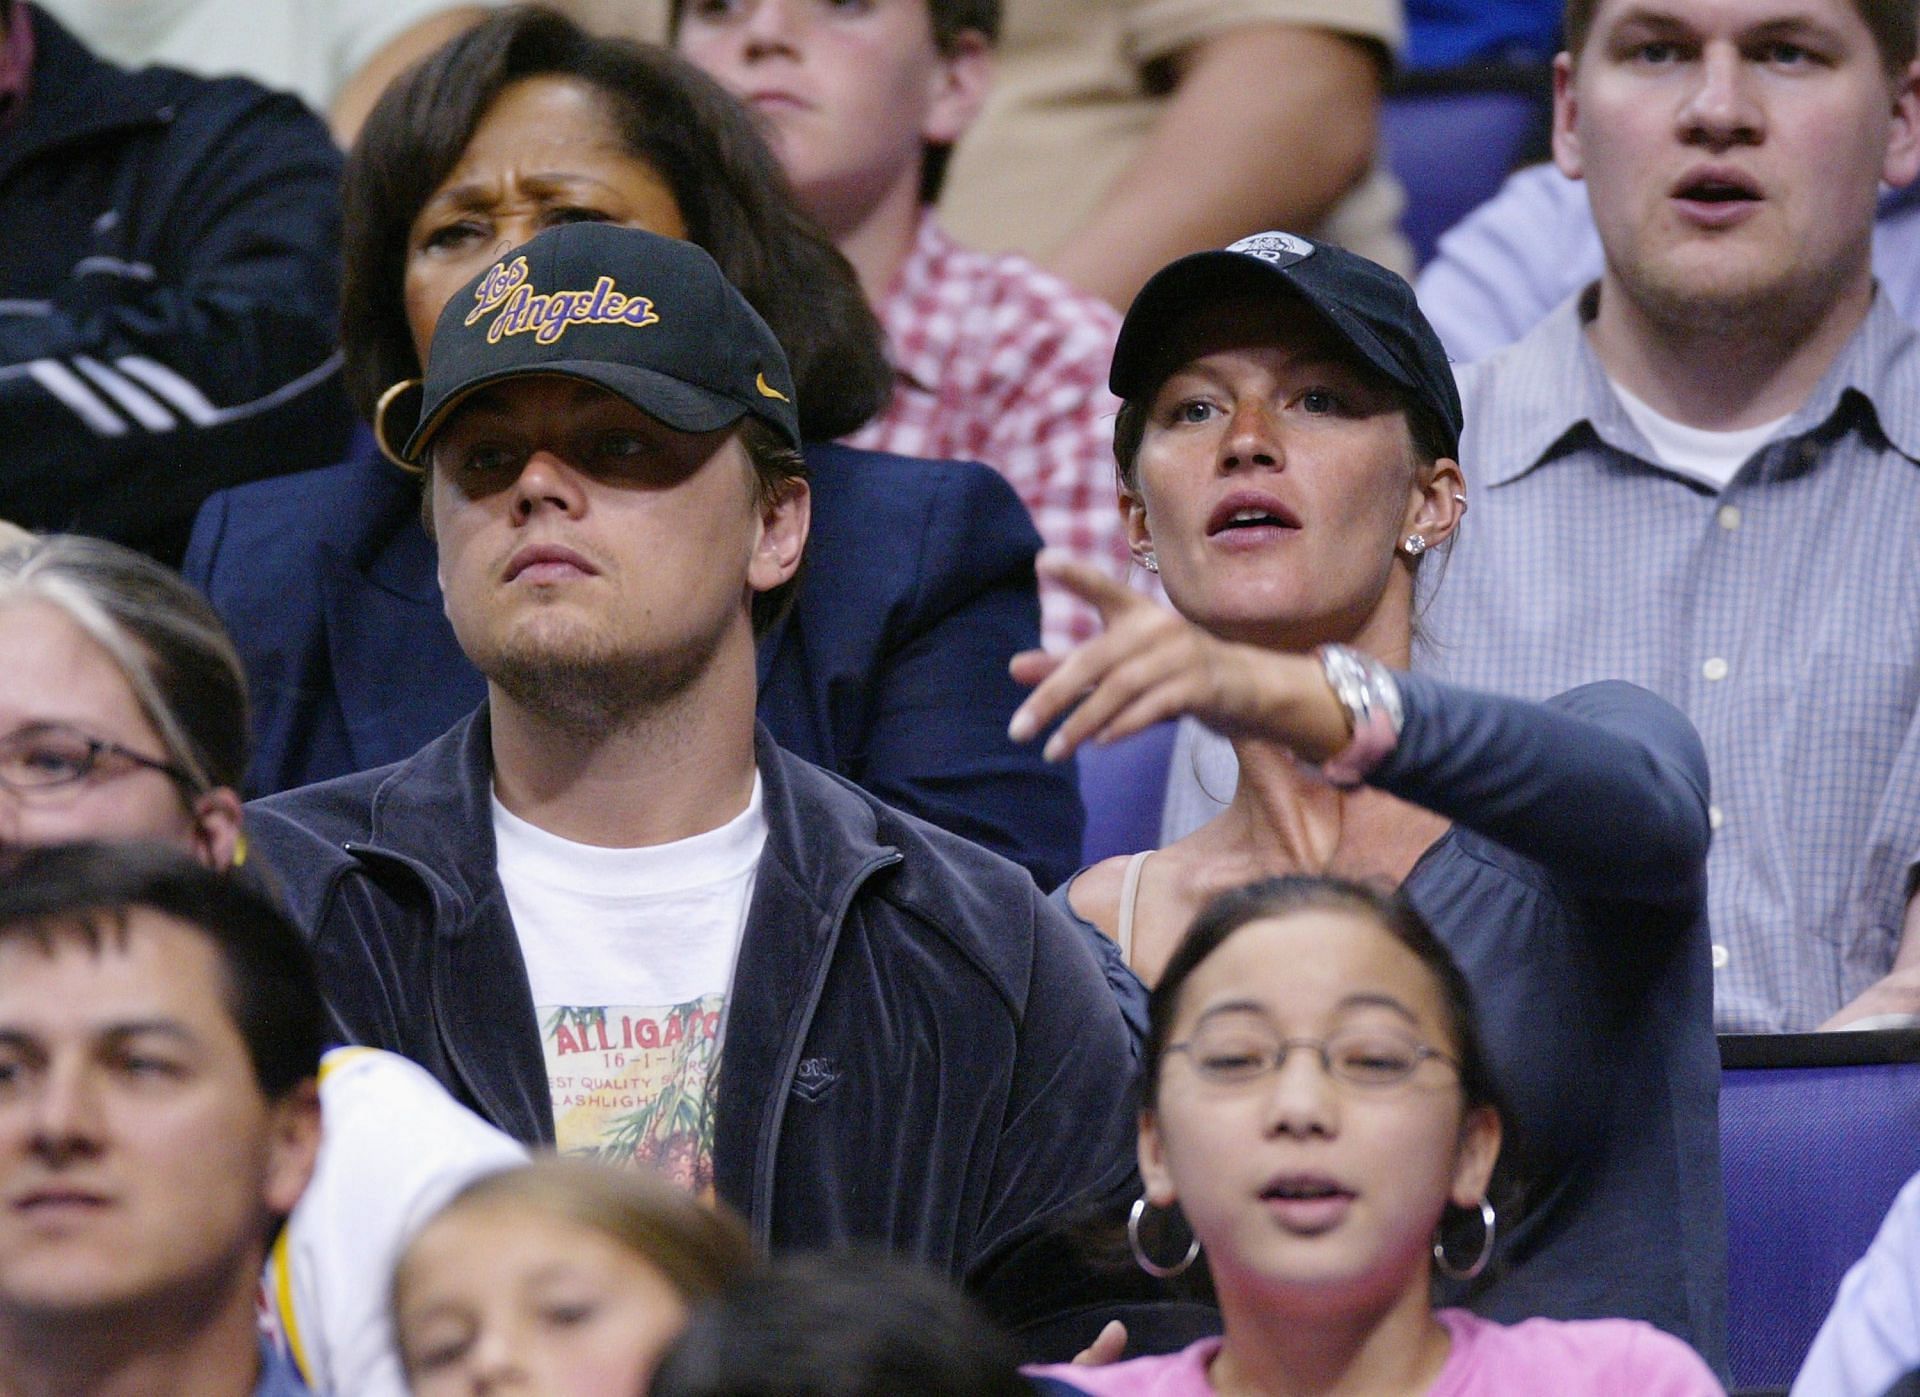 Celebs At Lakers vs. Grizzlies Game